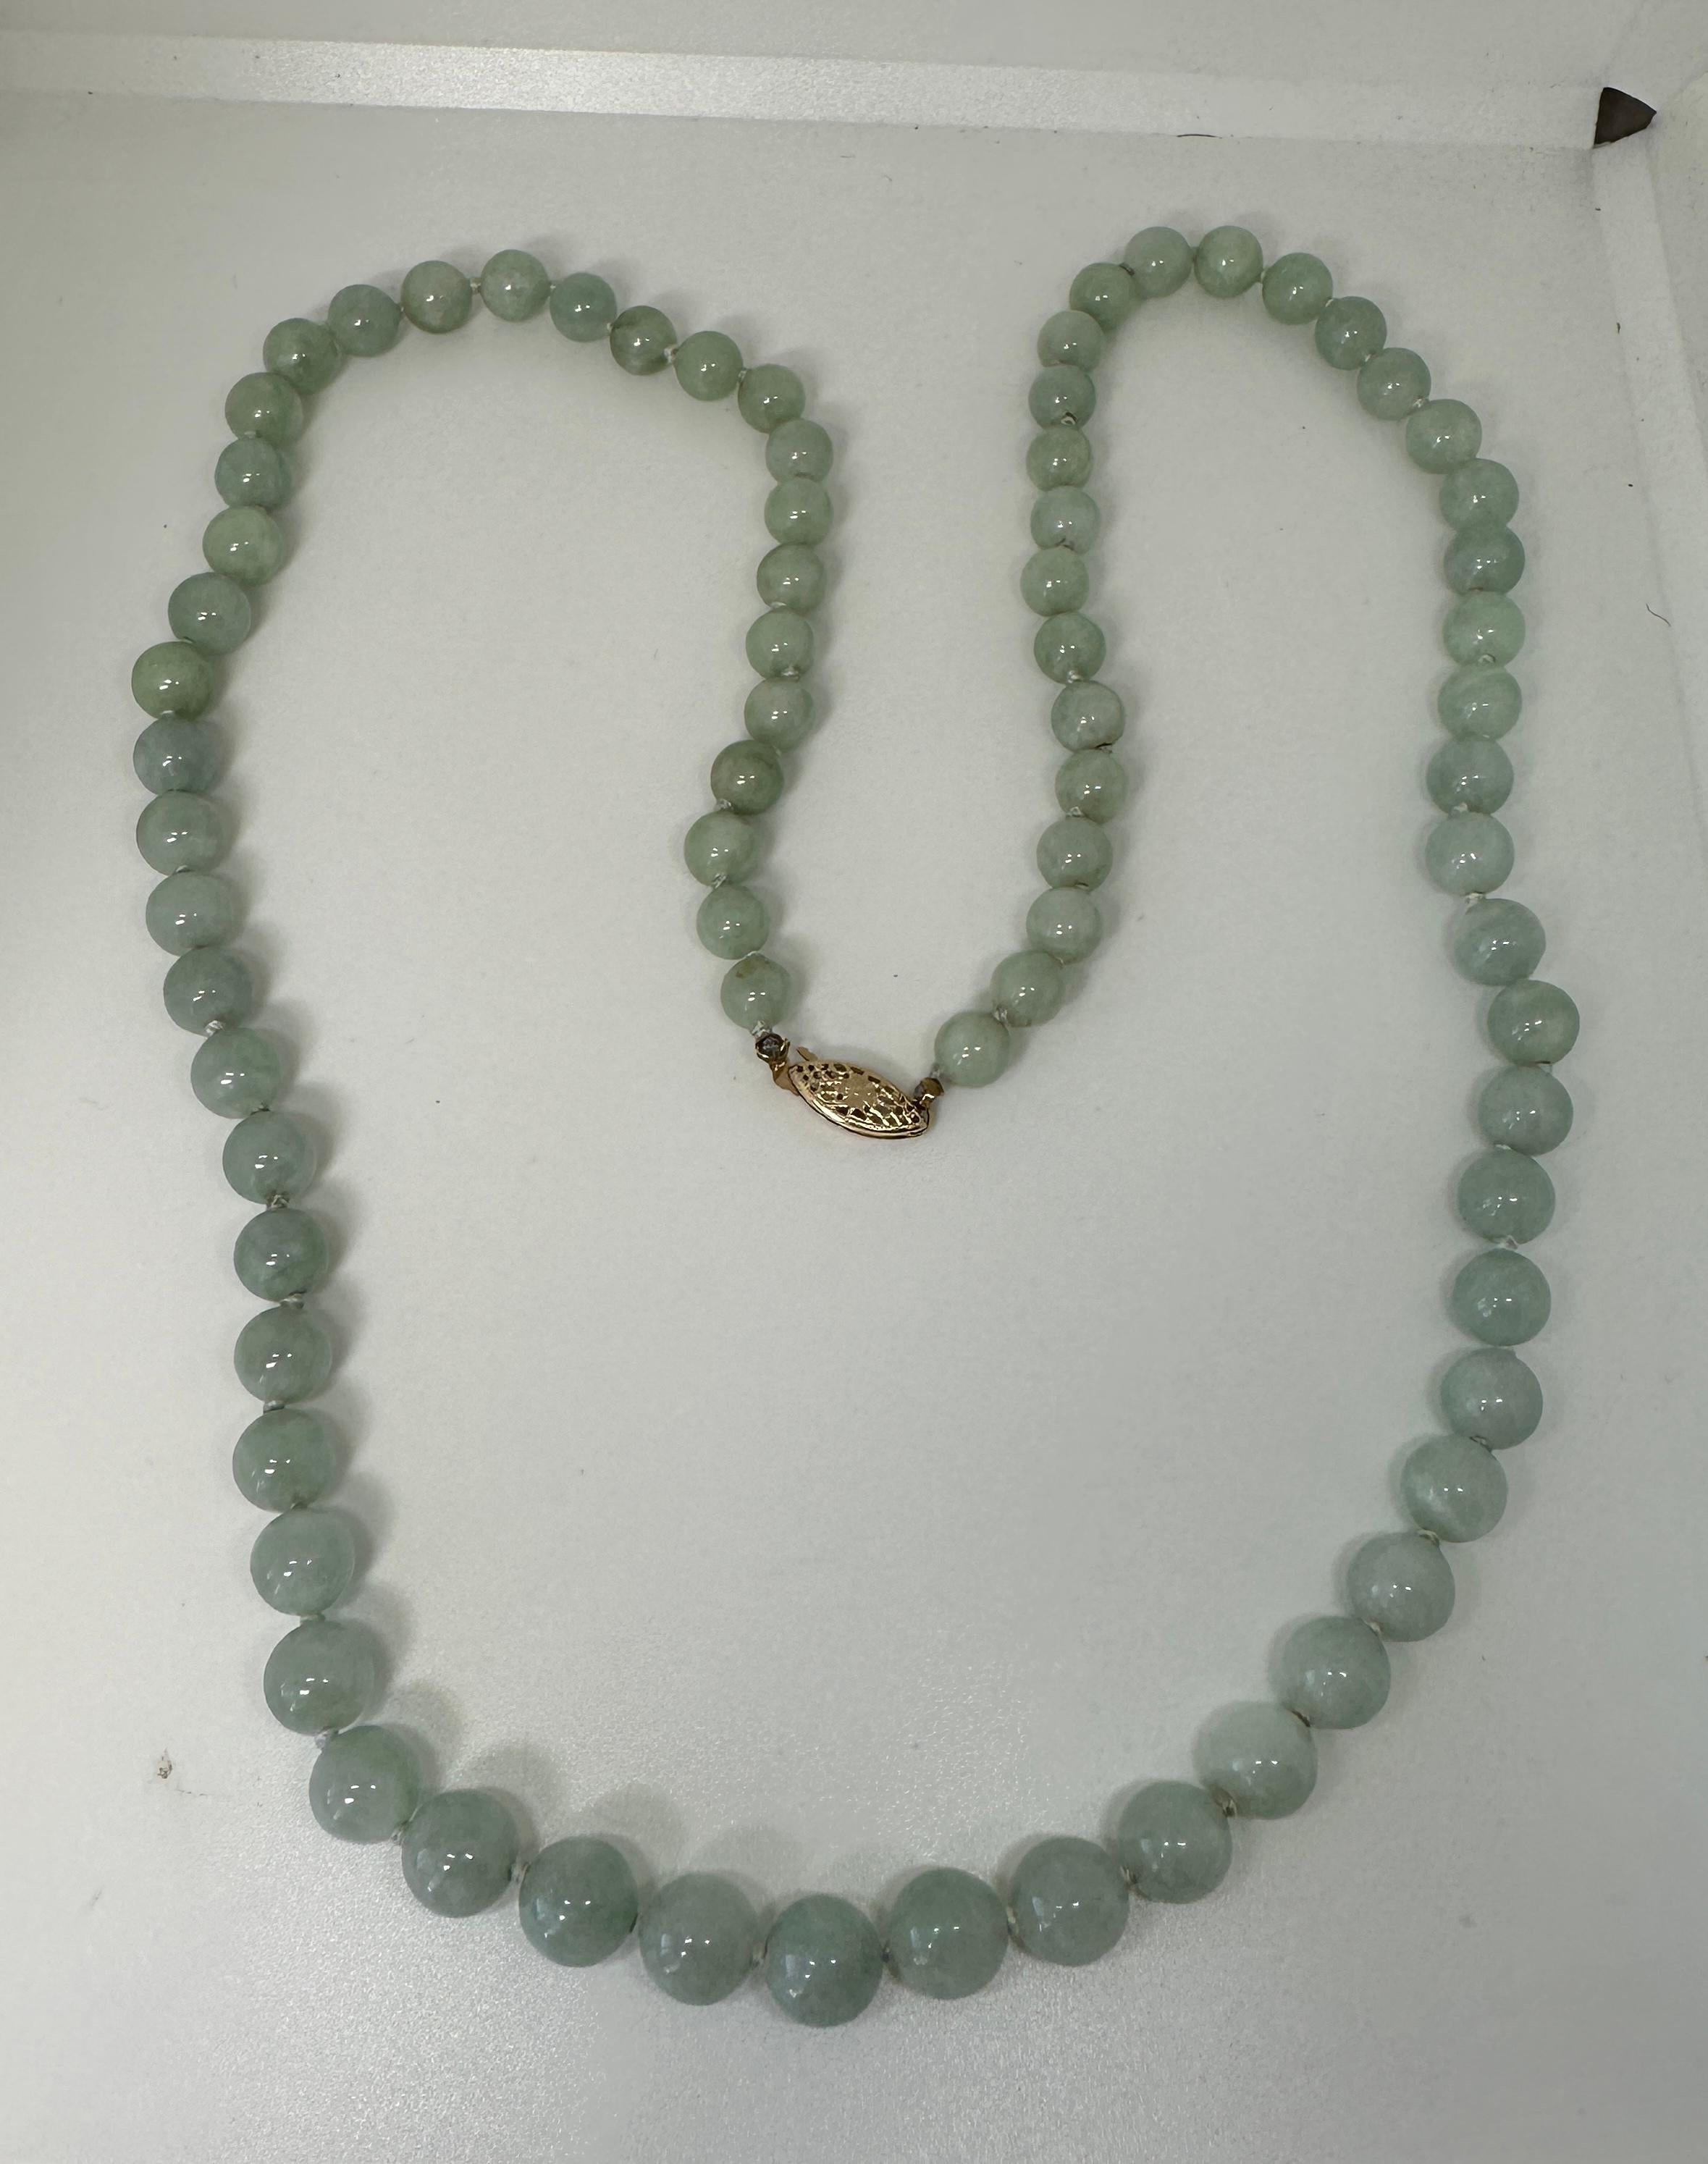 Art Deco Jade Necklace 30 Inches 14 Karat Yellow Gold 10mm Jade Beads For Sale 1